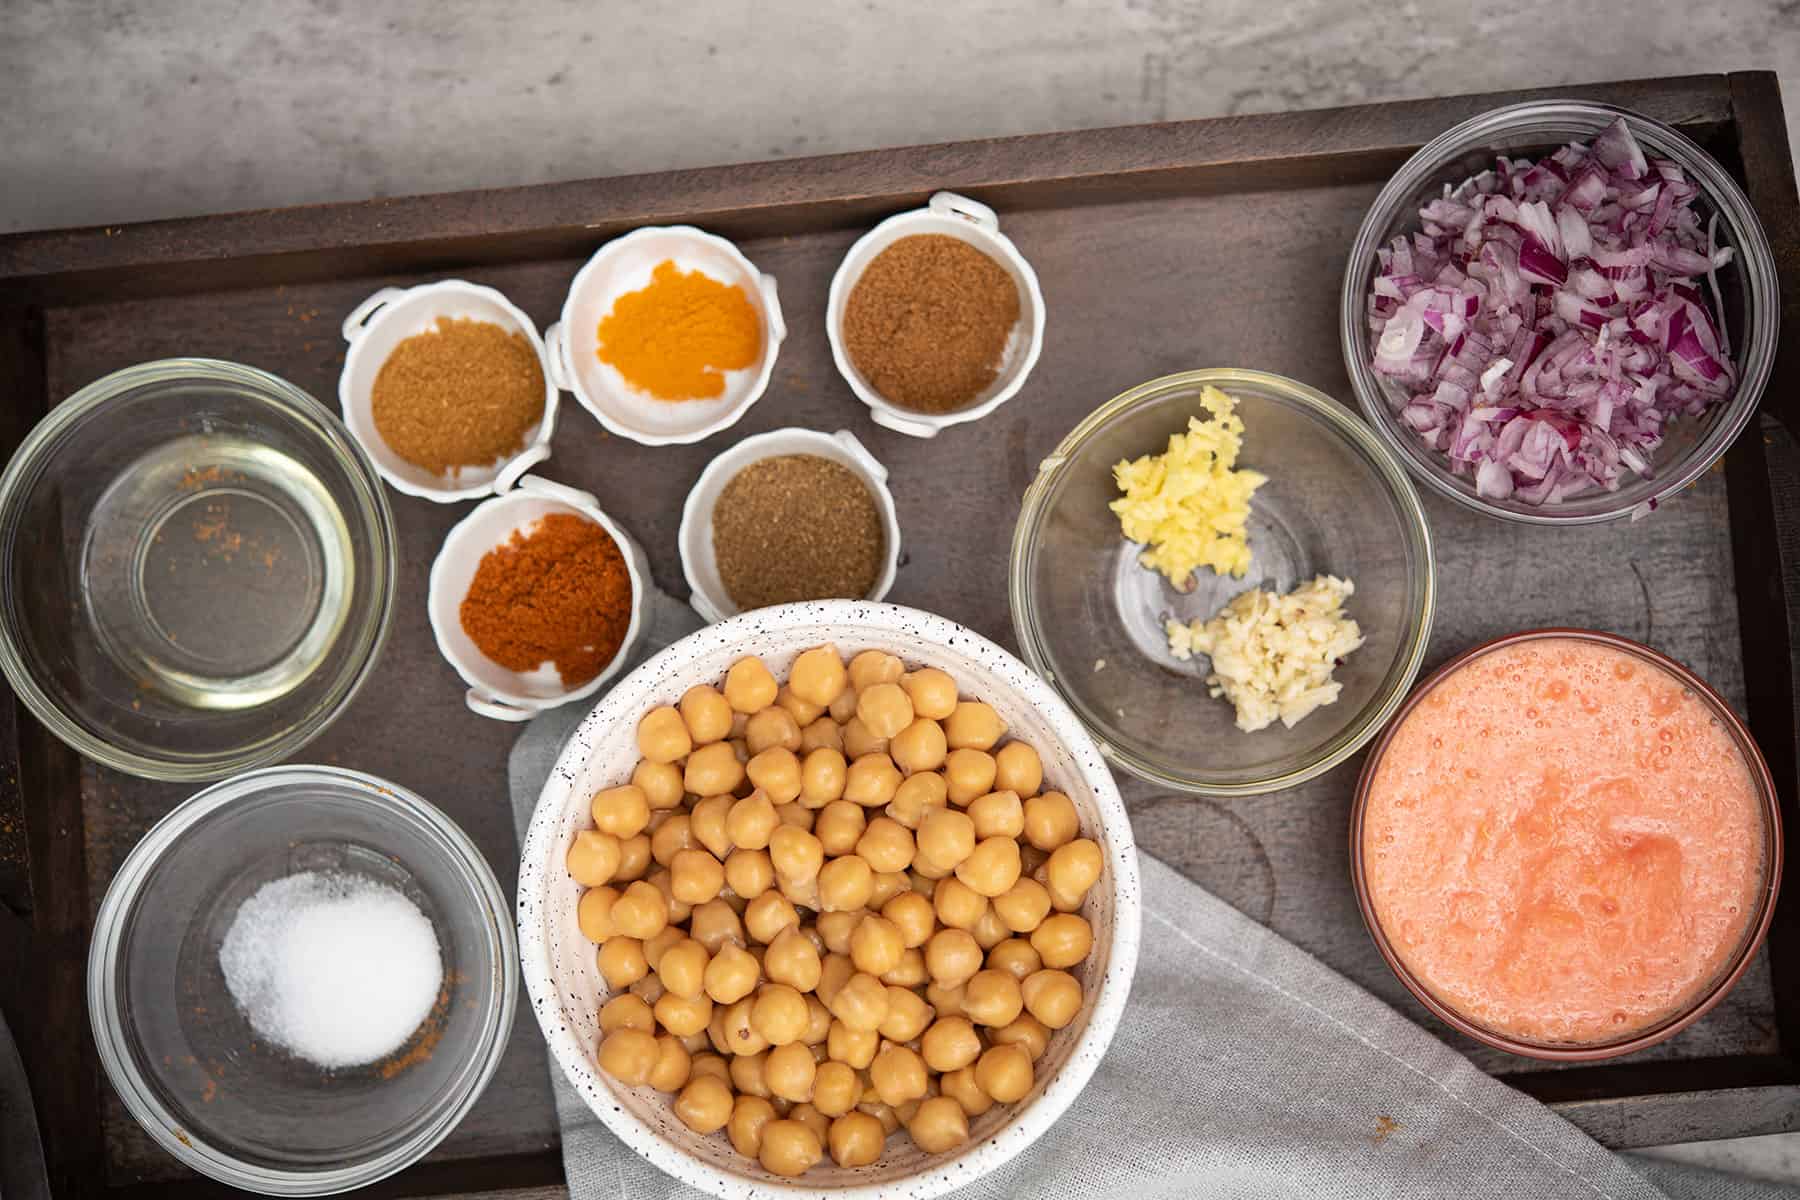 ingredients for almond milk curry placed in a wooden tray